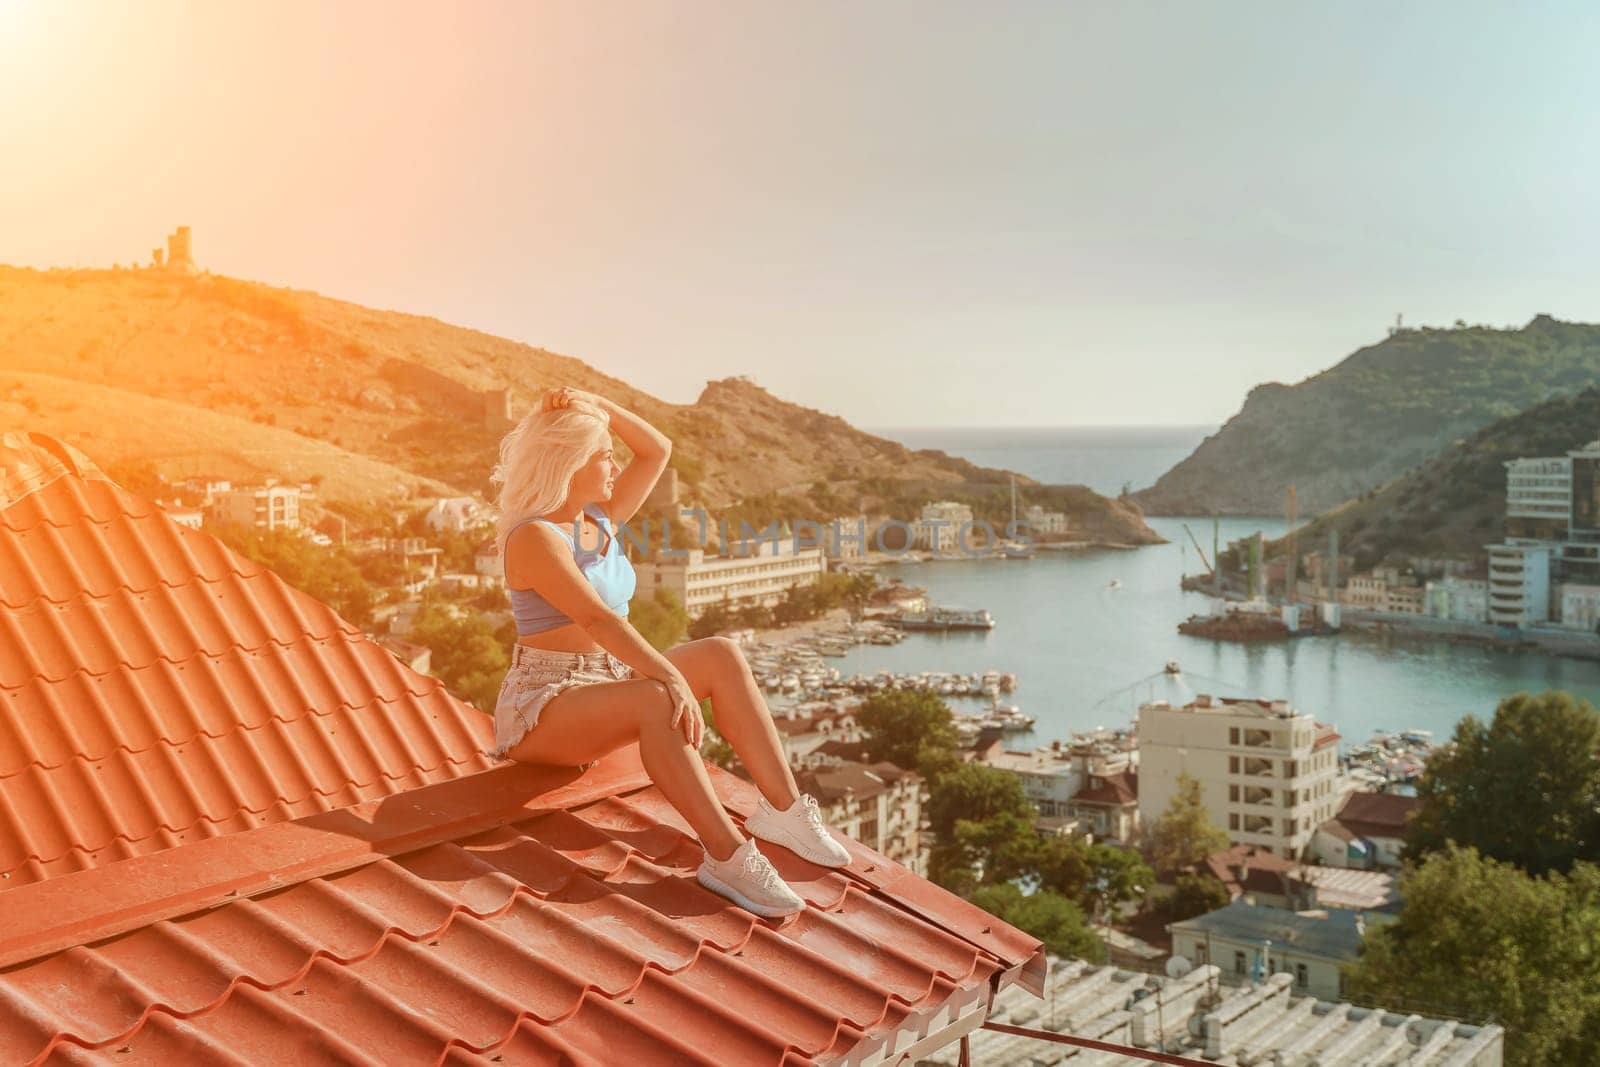 Woman sits on rooftop, enjoys town view and sea mountains. Peaceful rooftop relaxation. Below her, there is a town with several boats visible in the water. Rooftop vantage point. by Matiunina